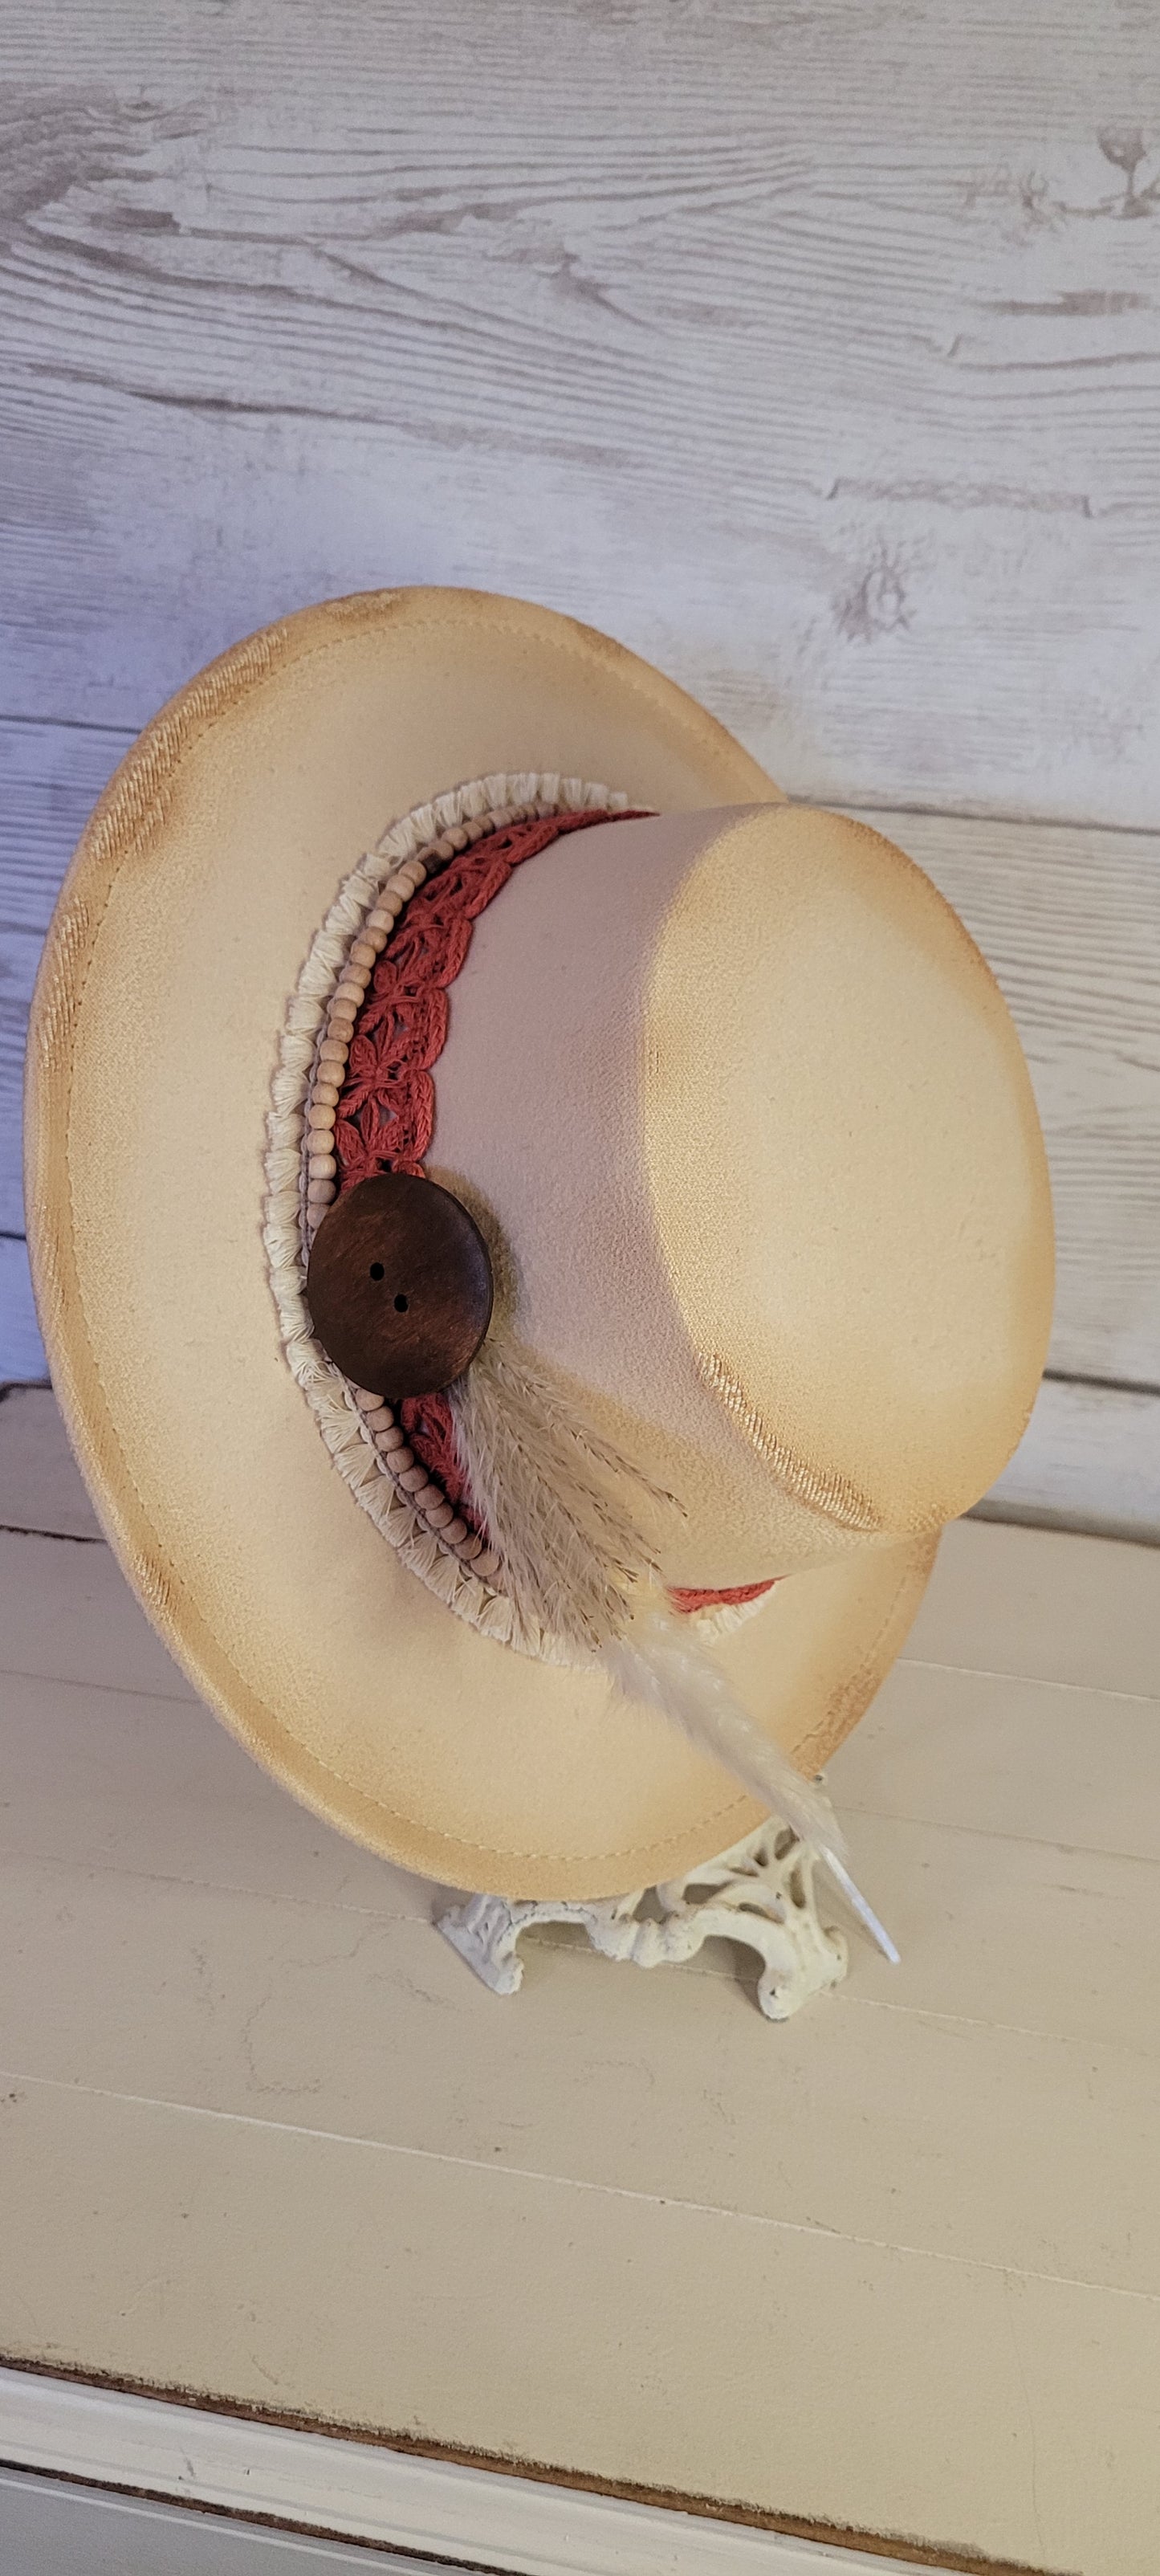 Lace ribbon, tassel ribbon, wooden bead band, button, & pampas Felt hat Flat brim 100% polyester Ribbon drawstring for hat size adjustment Head Circumference: 24" Crown Height: 3.5" Brim Length: 13.5" Brim Width: 12.75" Branded & numbered inside crown Custom burned by Kayla